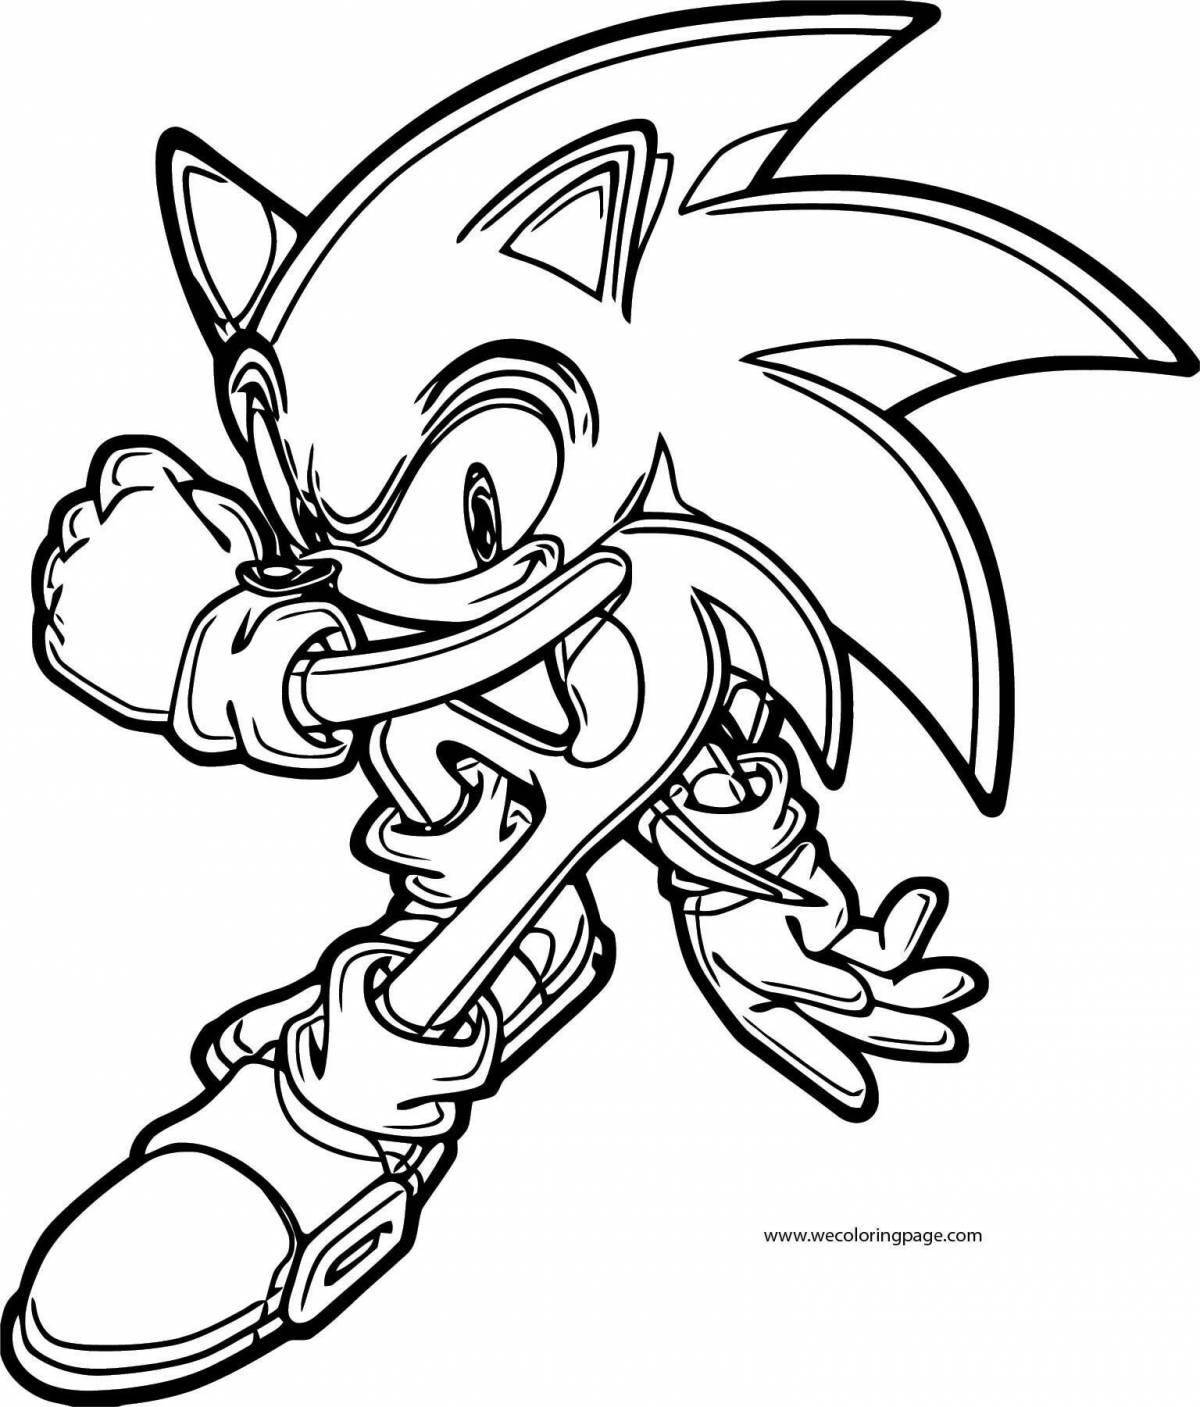 Sonic tails and knuckles glowing coloring book